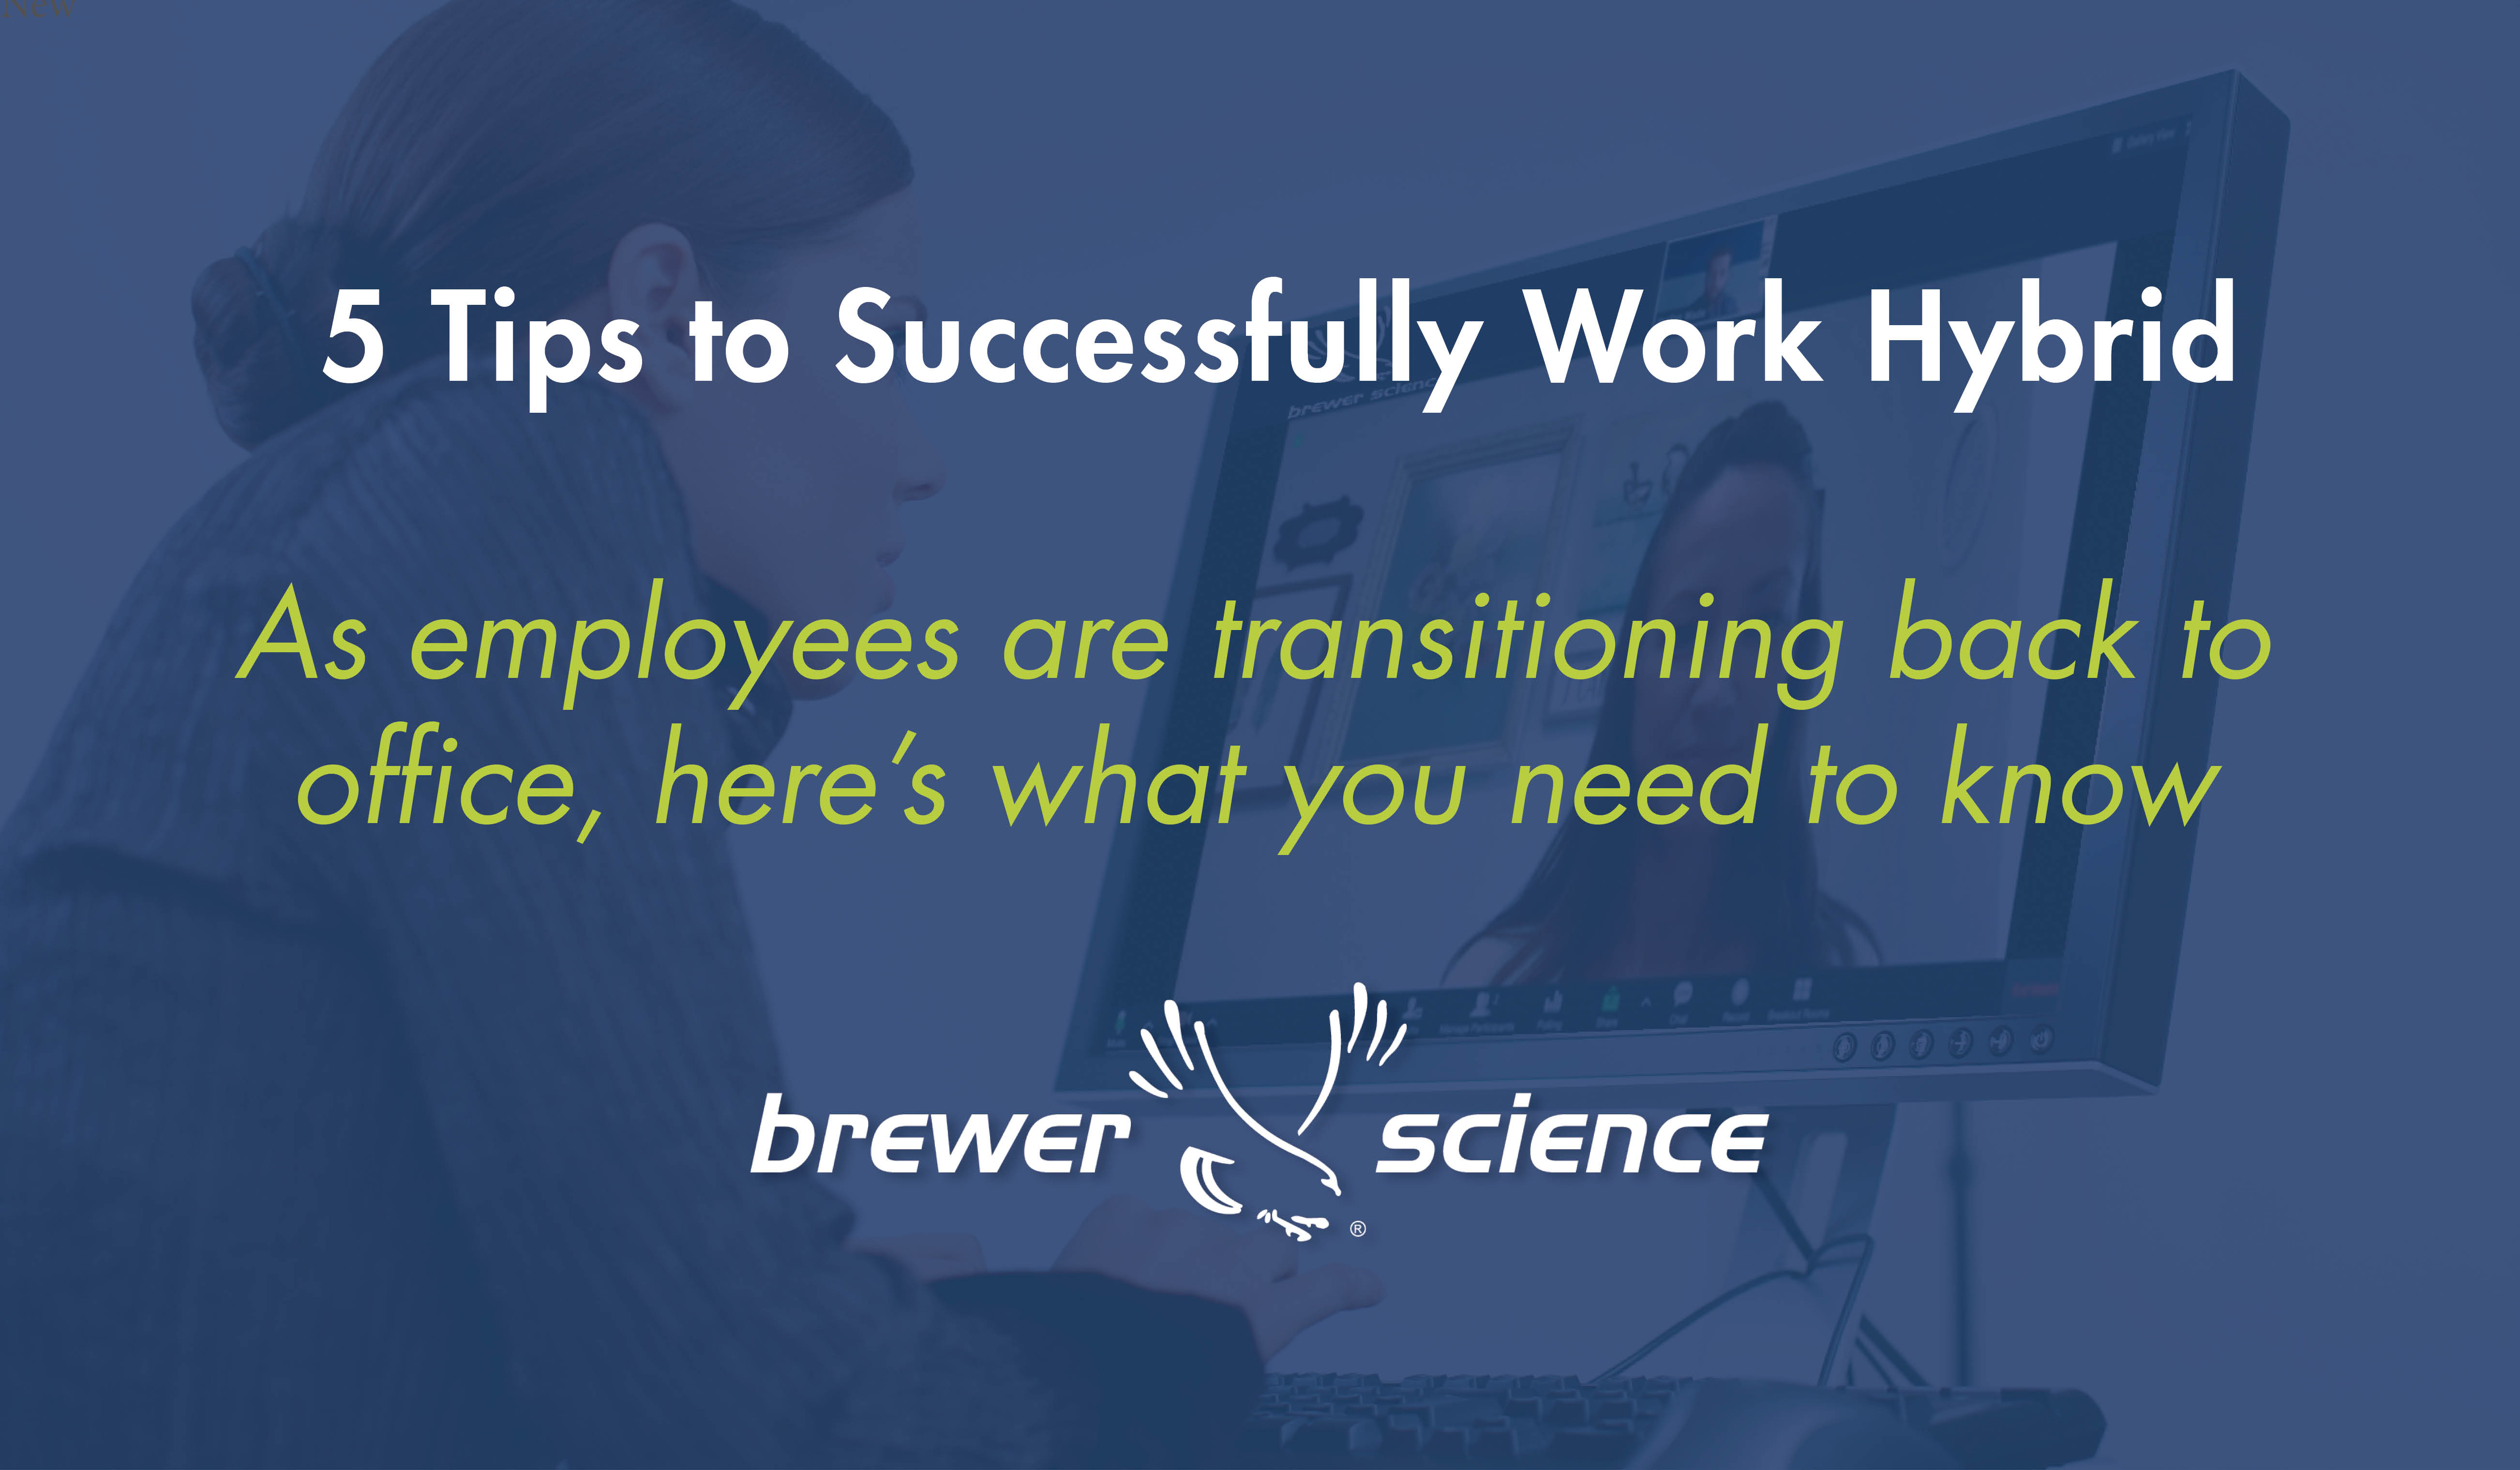 5 Tips to Successfully Work Hybrid